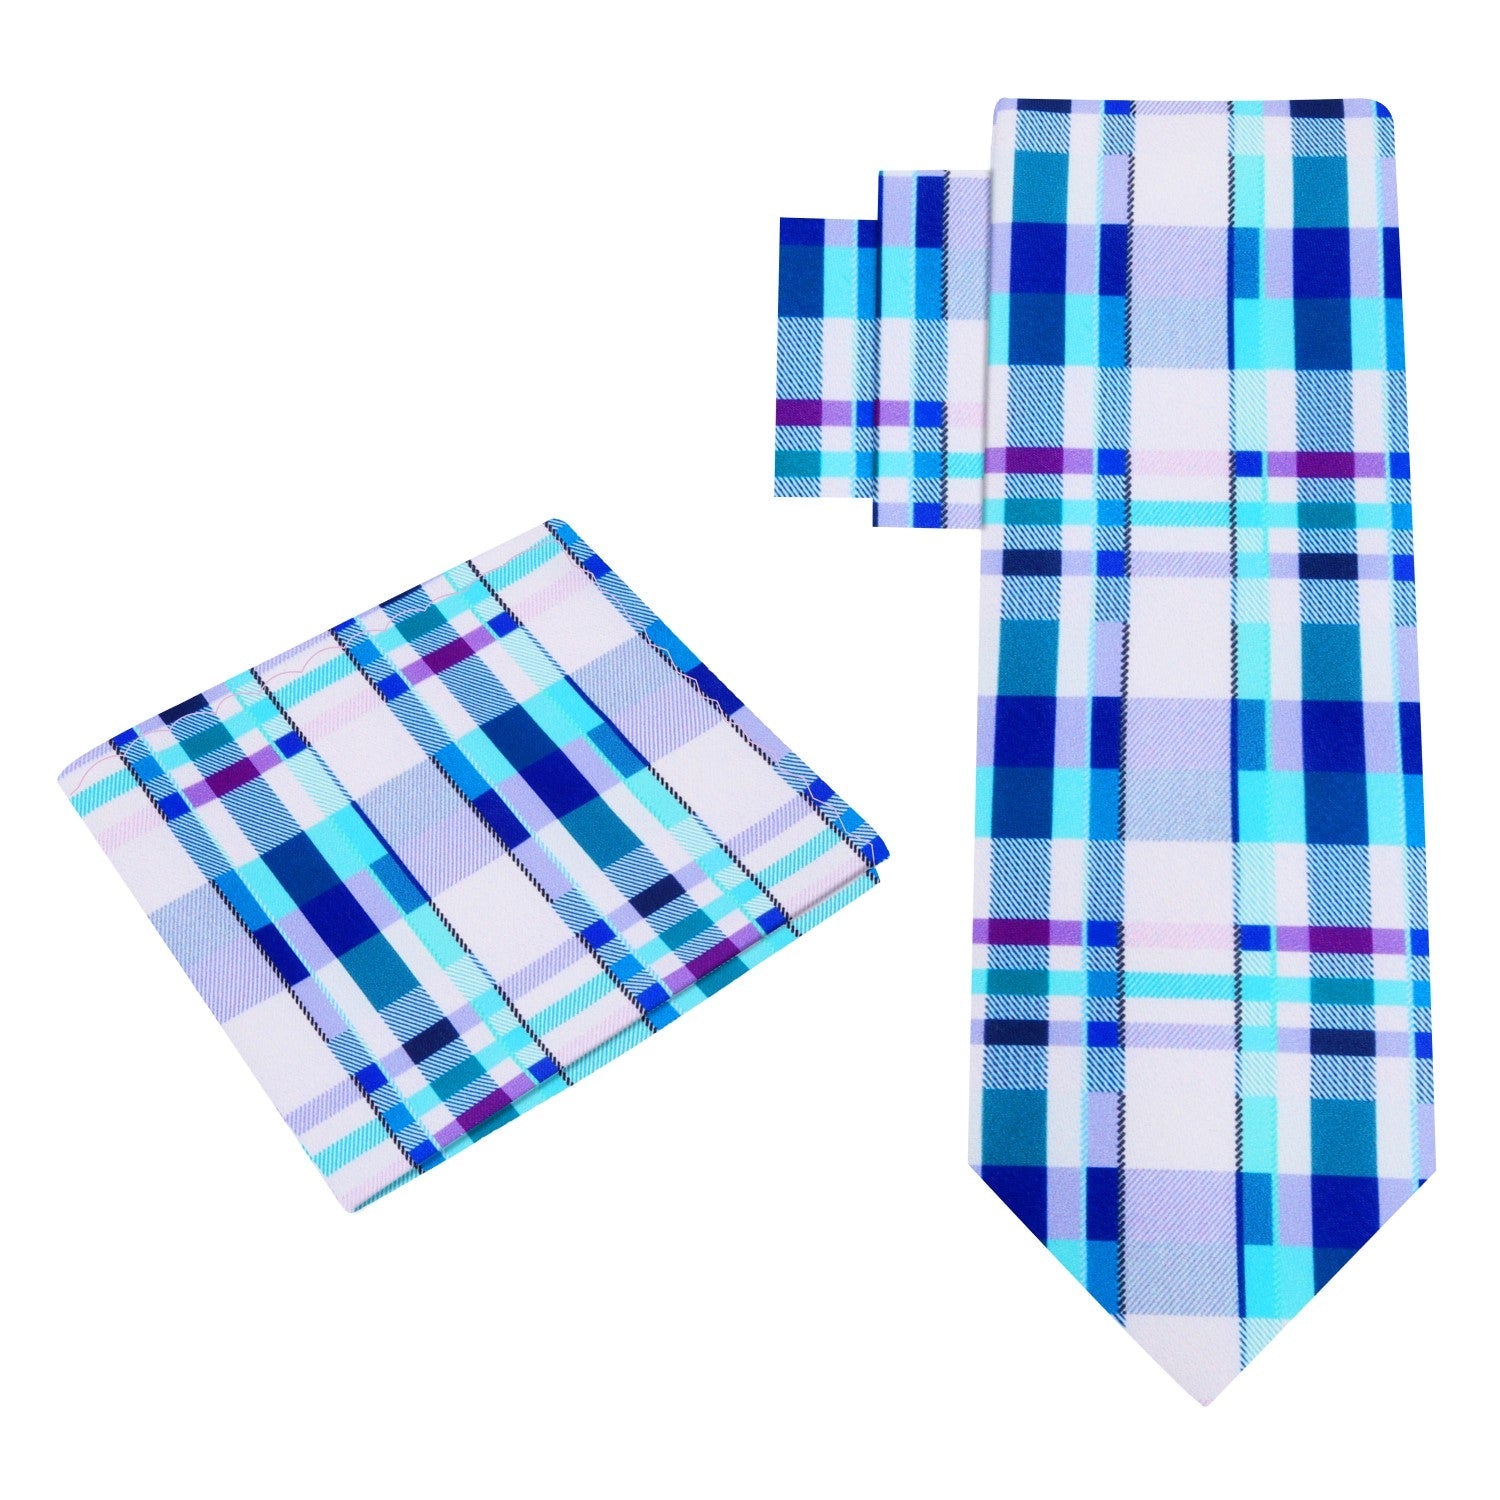 Alt view: Shades of Blue and Purple Plaid Tie and Pocket Square